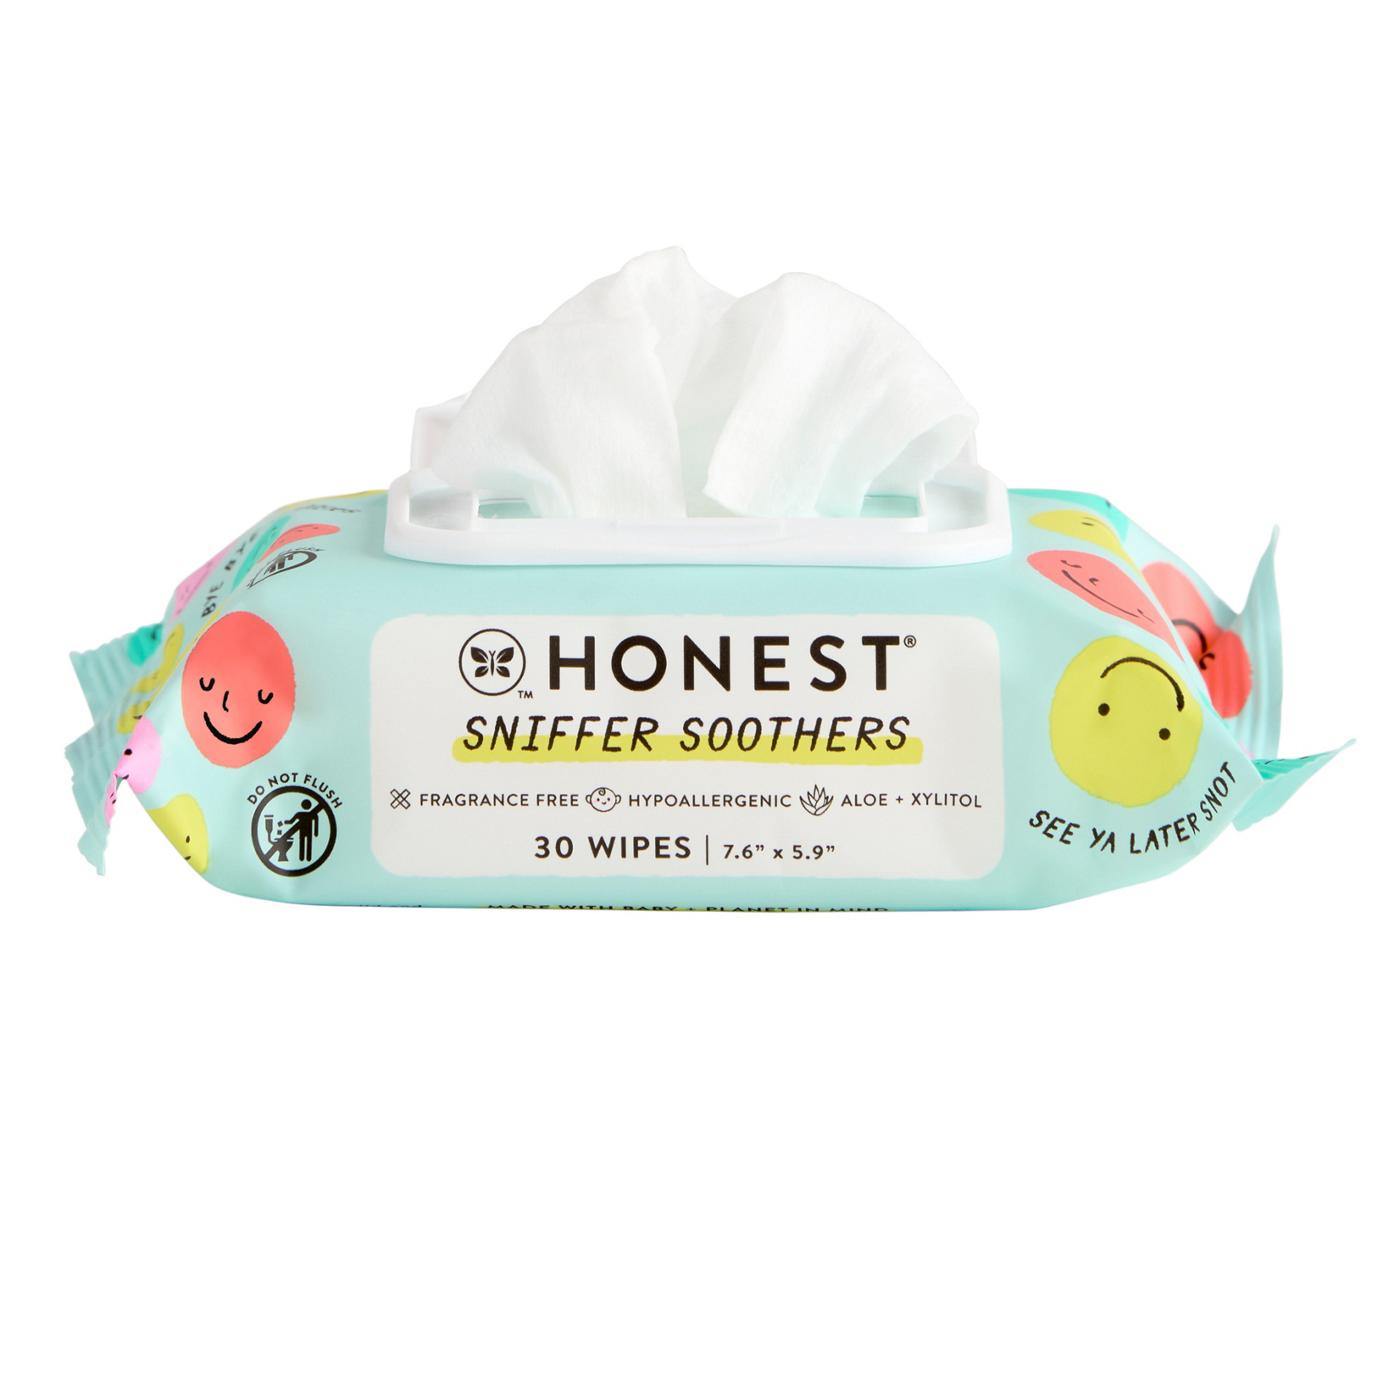 The Honest Company Sniffer Soothers Wipes; image 5 of 5